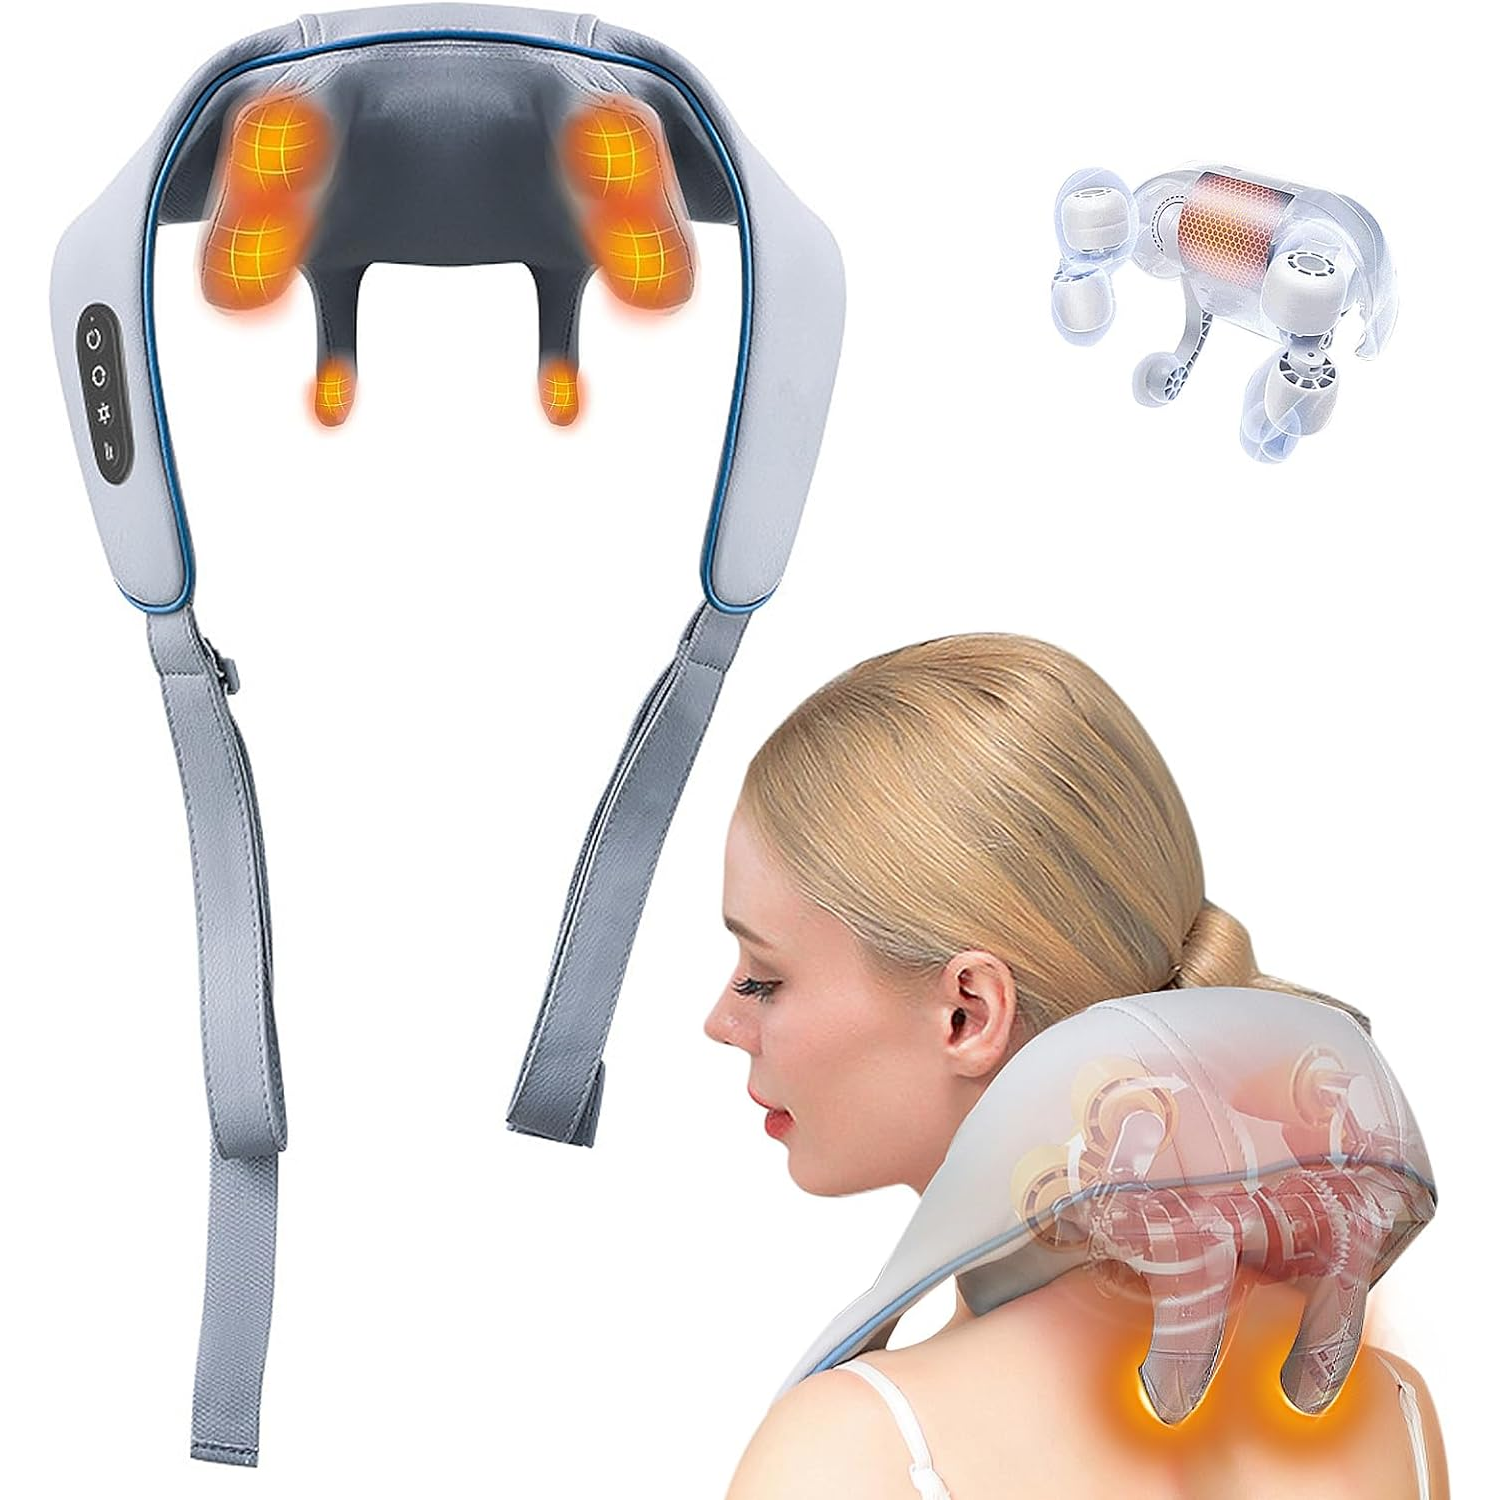 5D Shiatsu Neck and Back Massager with Soothing Heat Wireless Electric Deep  Tissue Kneading Massage Pillow Shoulder Leg Body